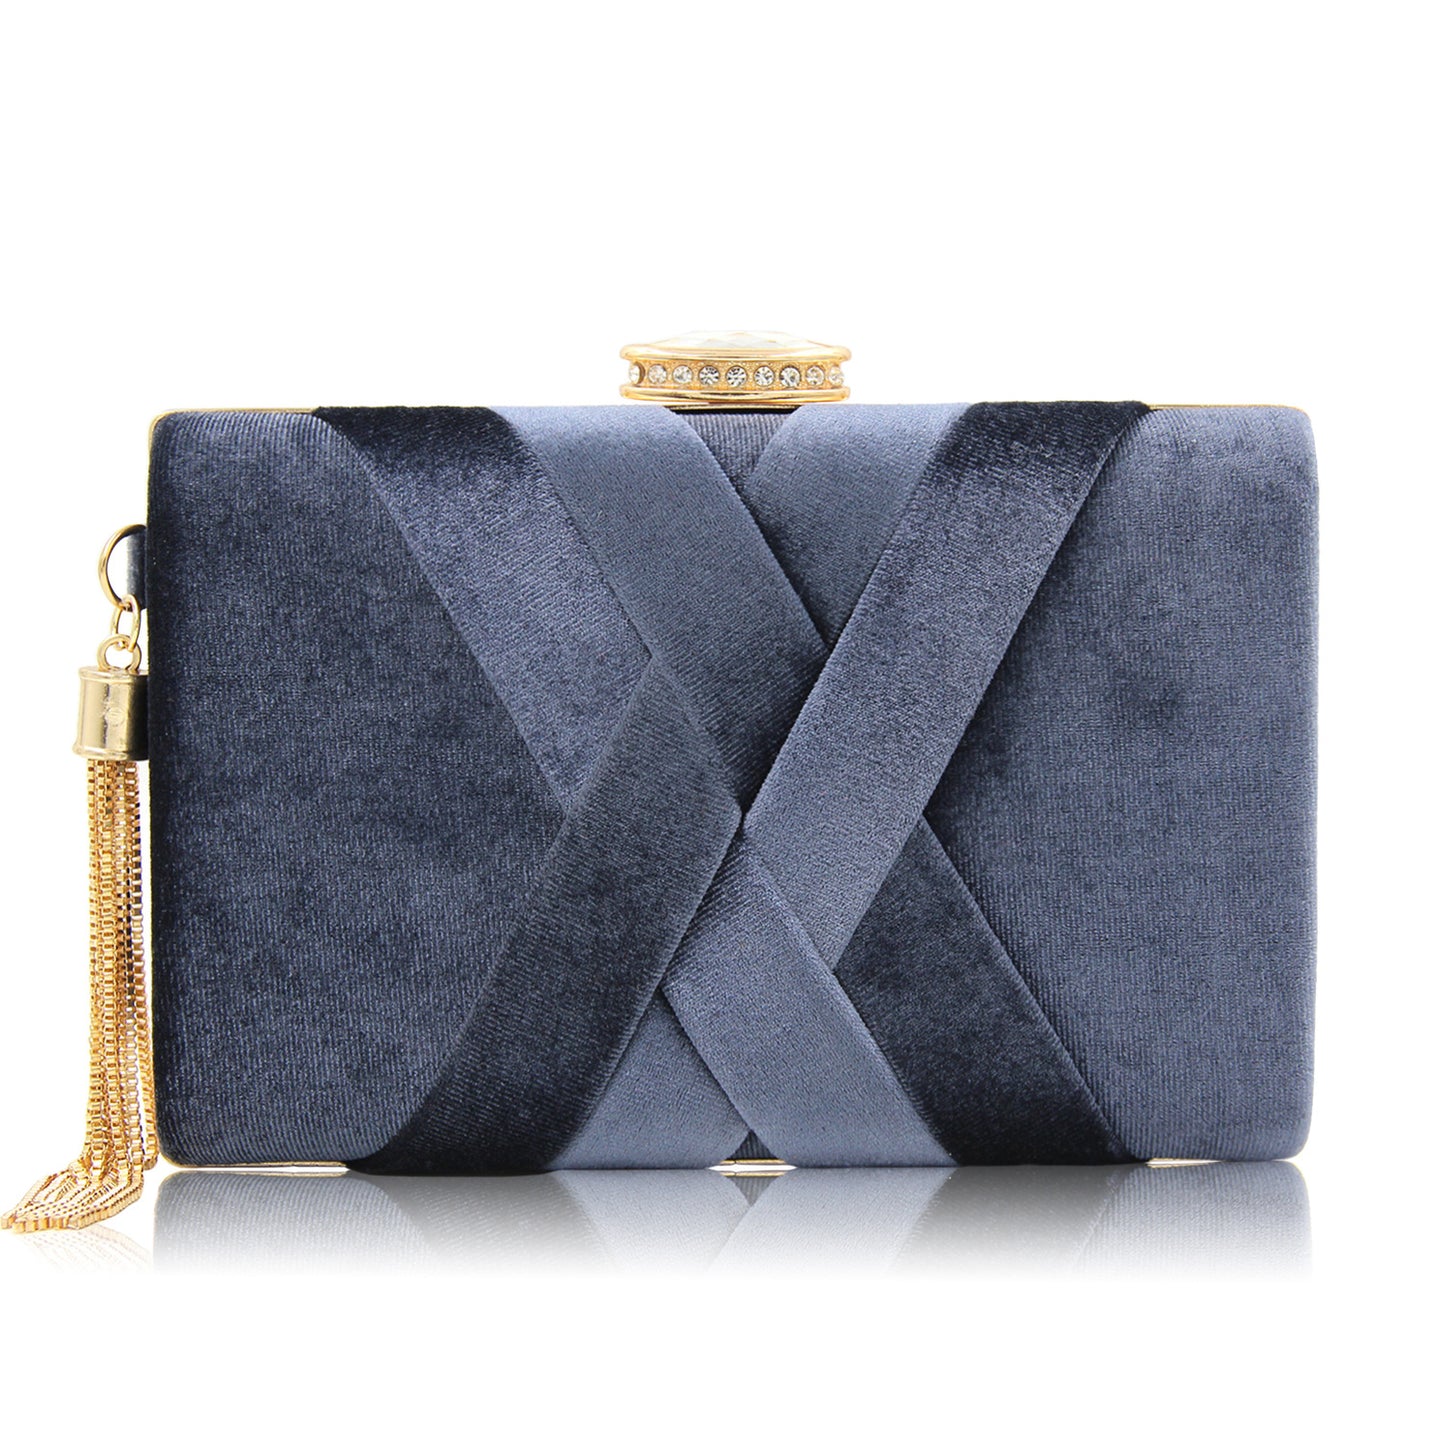 Milisente New Arrival Women Clutch Bags Top Quality Suede Clutches Purses Ladies Tassels Evening Bag Wedding Clutches